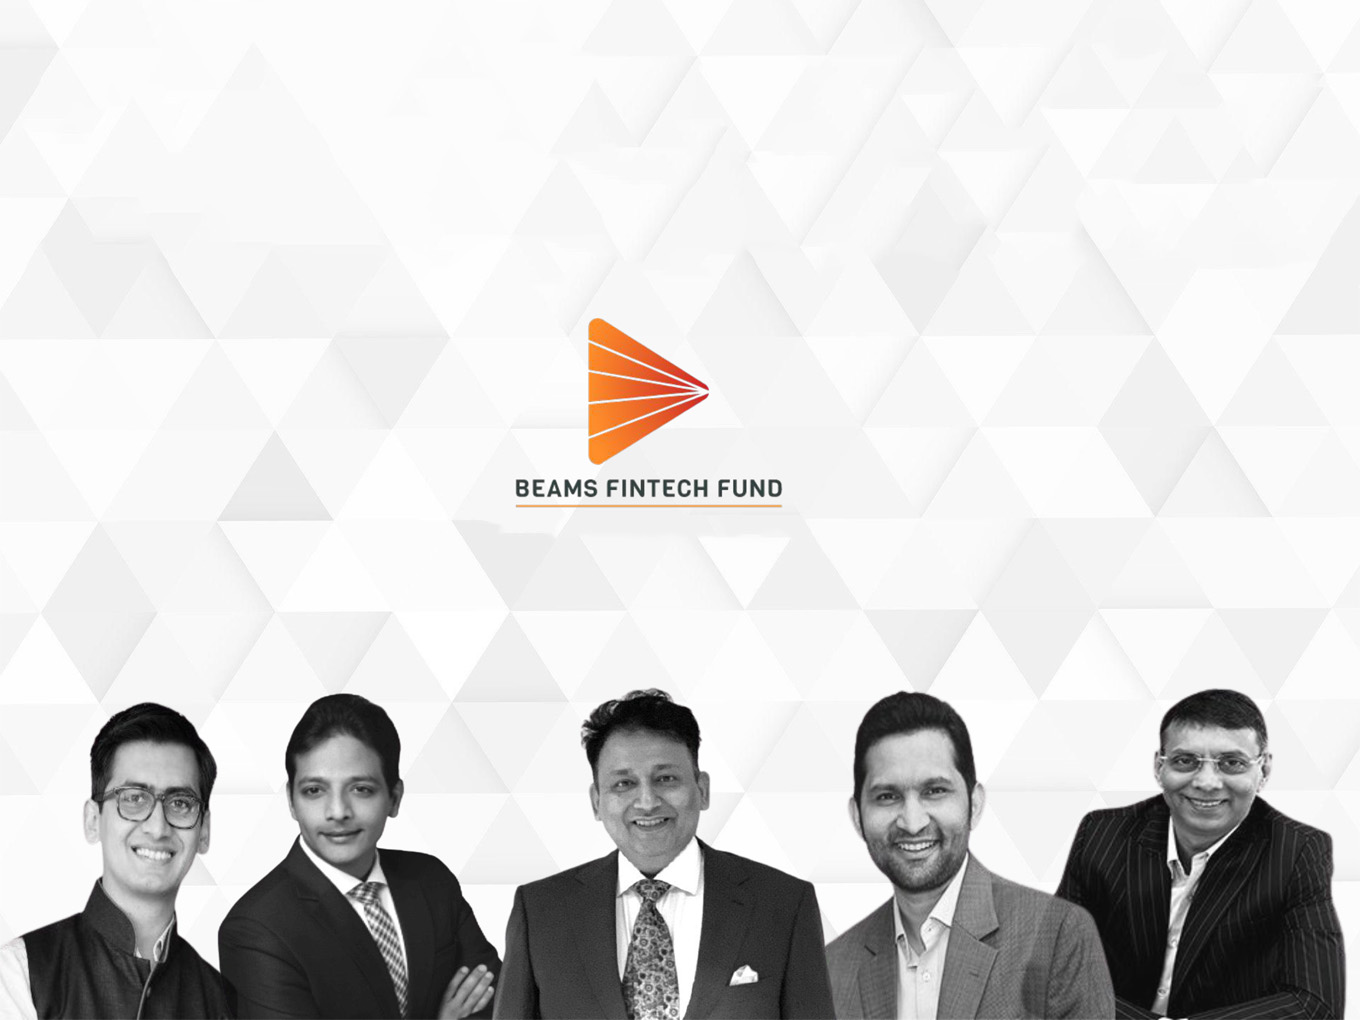 Venture Catalysts Launches $100 Mn FIntech Exclusive Fund With 9Unicorns Summary It plans to invest $8 Mn to $10 Mn in the Series B and C rounds of growth-stage startups led by high-quality founders It also aims to build a portfolio of a dozen fintech startups that will collectively be worth more than $200 Bn by 2025 Eleven new Indian fintech unicorns were minted last year including two crypto startups that entered the club. Well-known startup incubator Venture Catalysts has launched a growth capital fintech fund called Beams FinTech Fund that will invest in India-based fintech startups. It is being launched by an integrated incubator from Venture Catalysts and 9Unicorns.